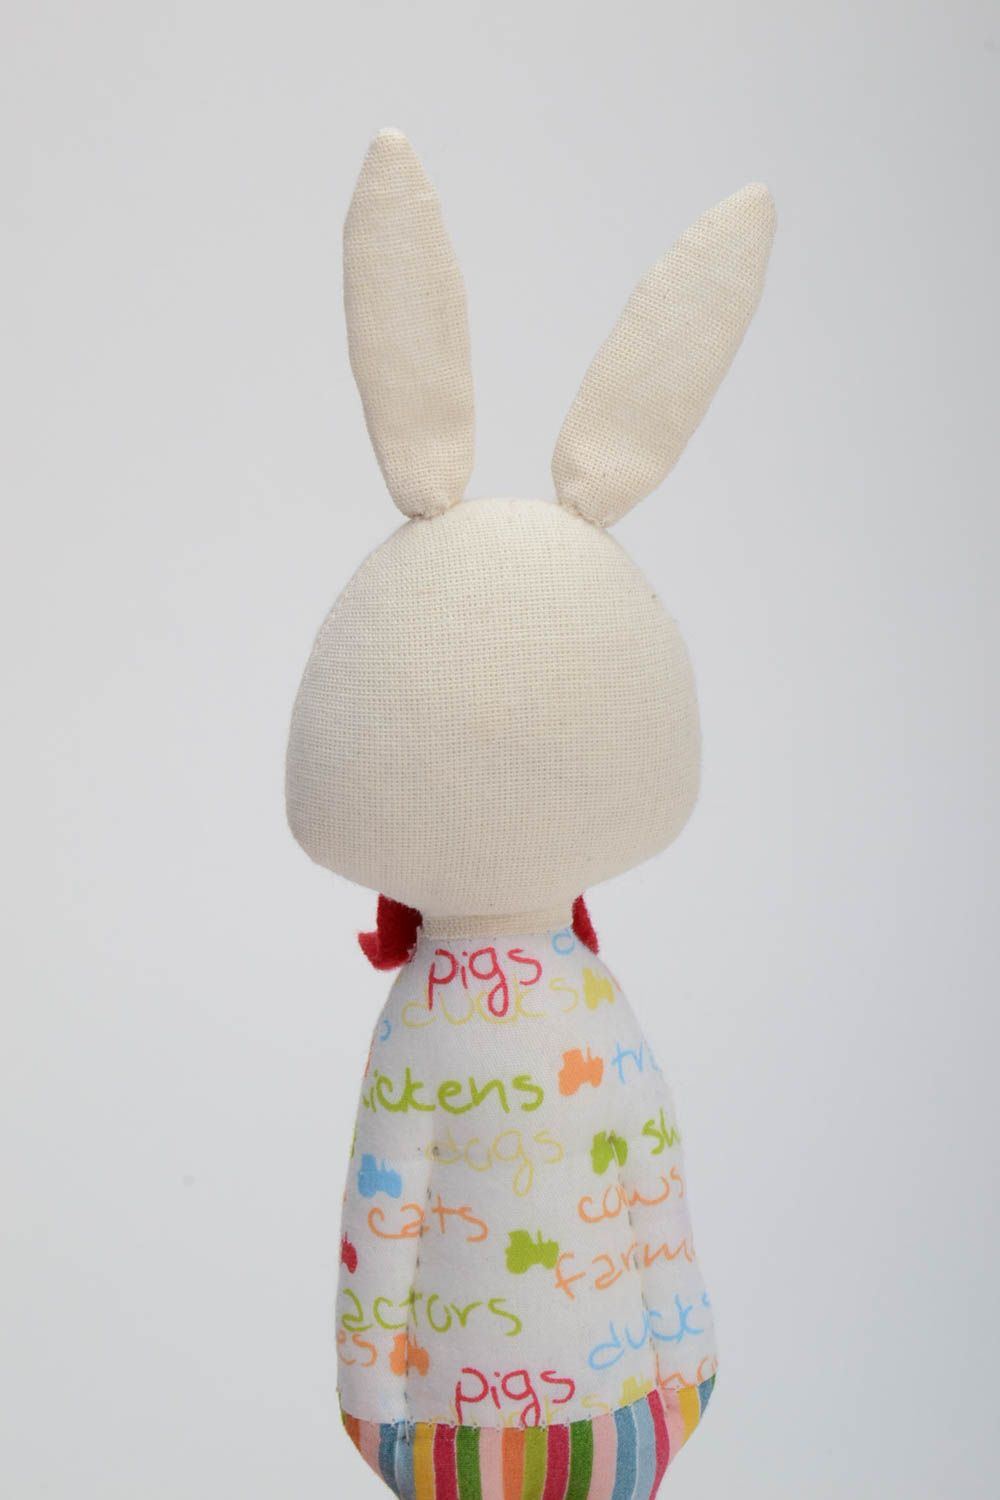 Handmade small cotton fabric soft toy rabbit in striped trousers with red bow tie photo 3